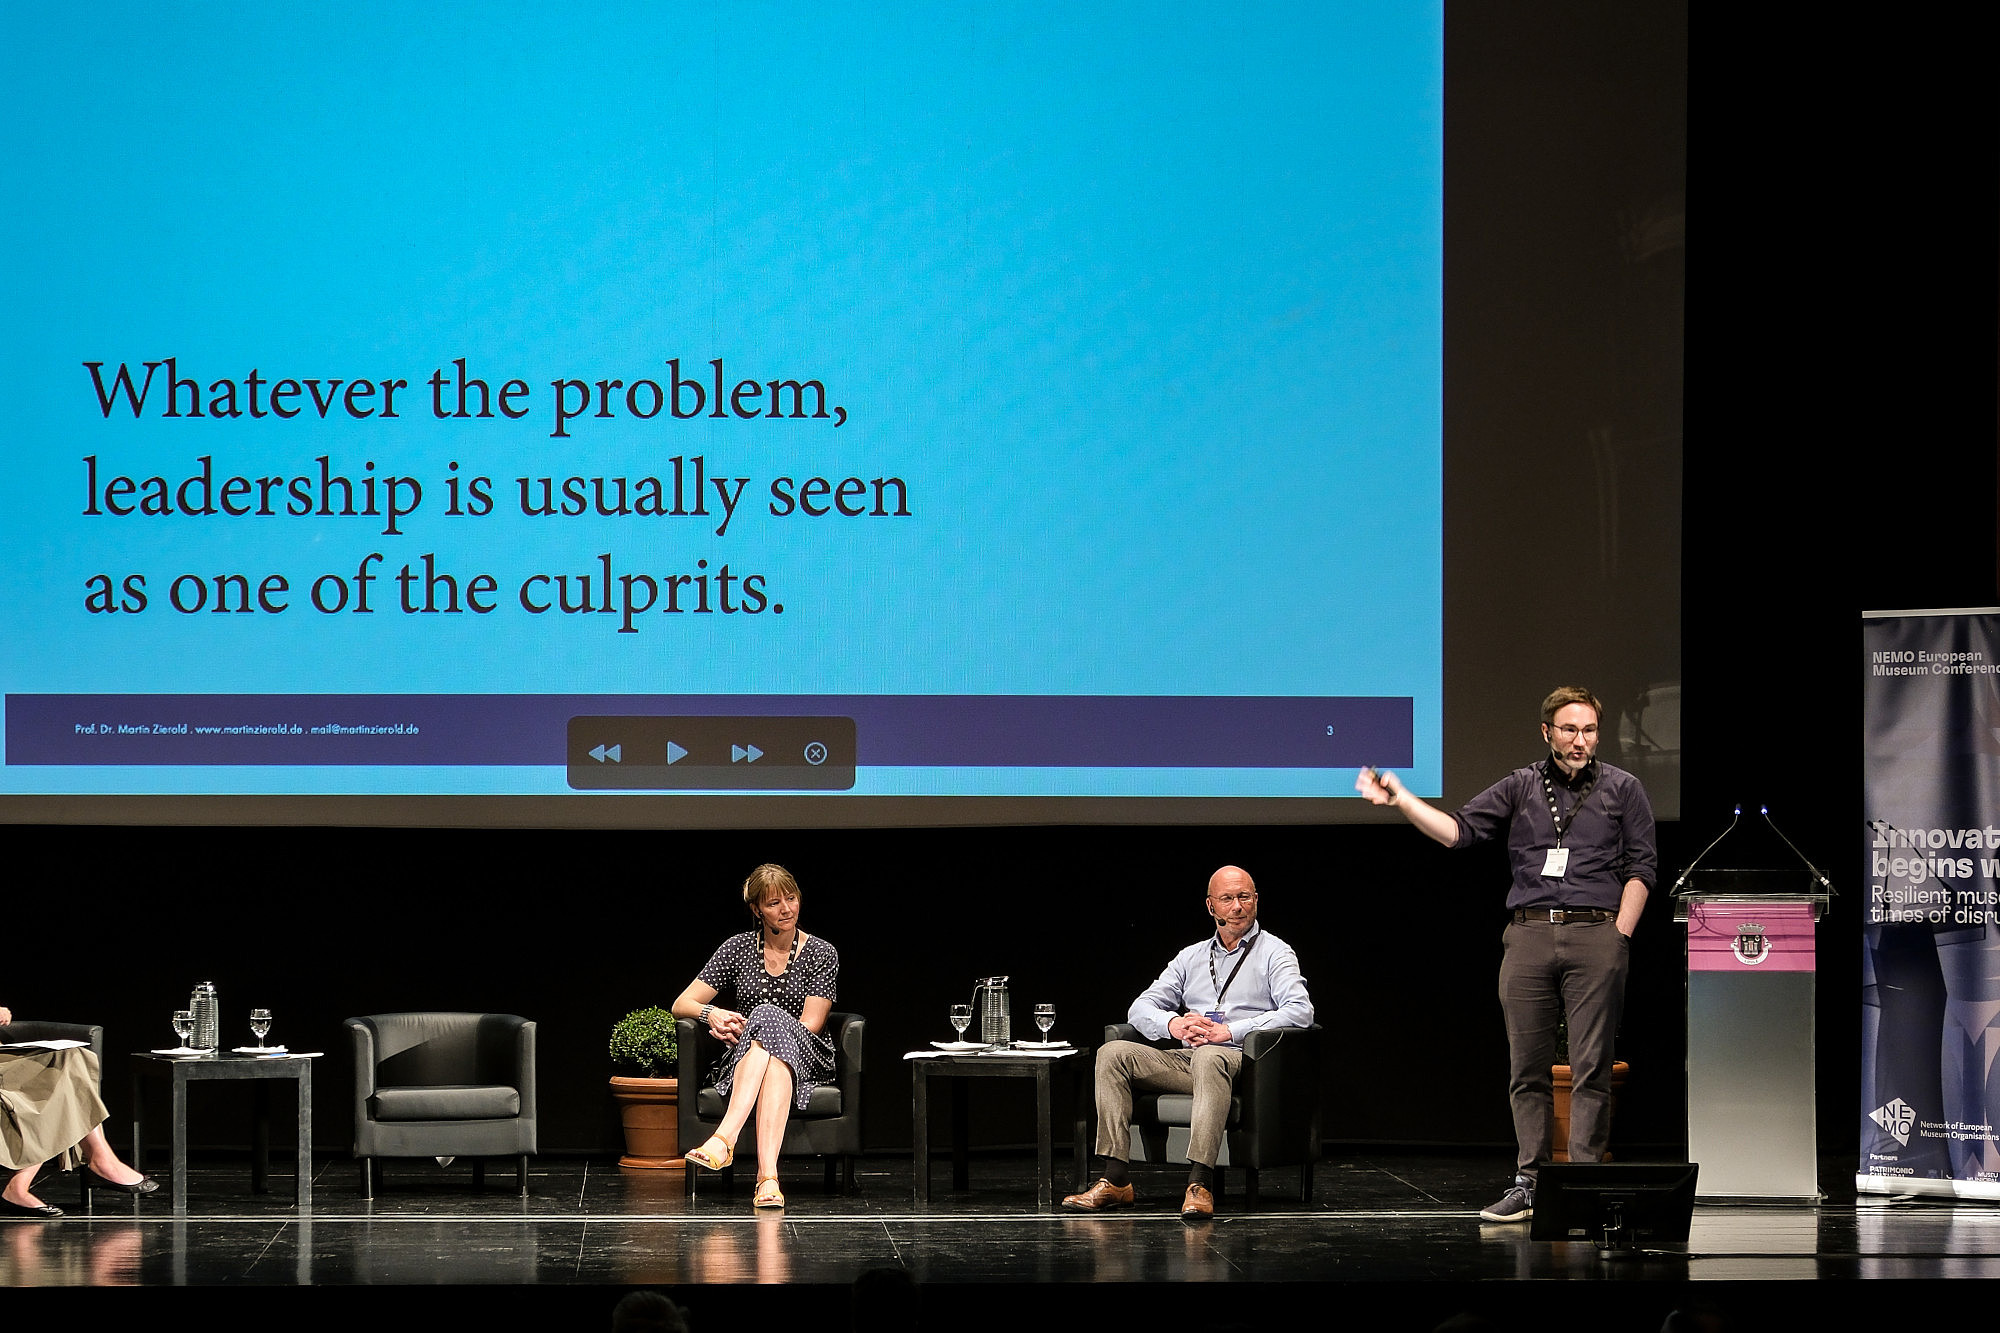 Three people are sitting on a stage. Another person is standing, gesturing with their arms and talking. In the background, presentation slides are projected to a screen. The headline on the slide reads: "Whatever the problem, leadership is usually seen as one of the culprits."  © Image: Jorge Gomes